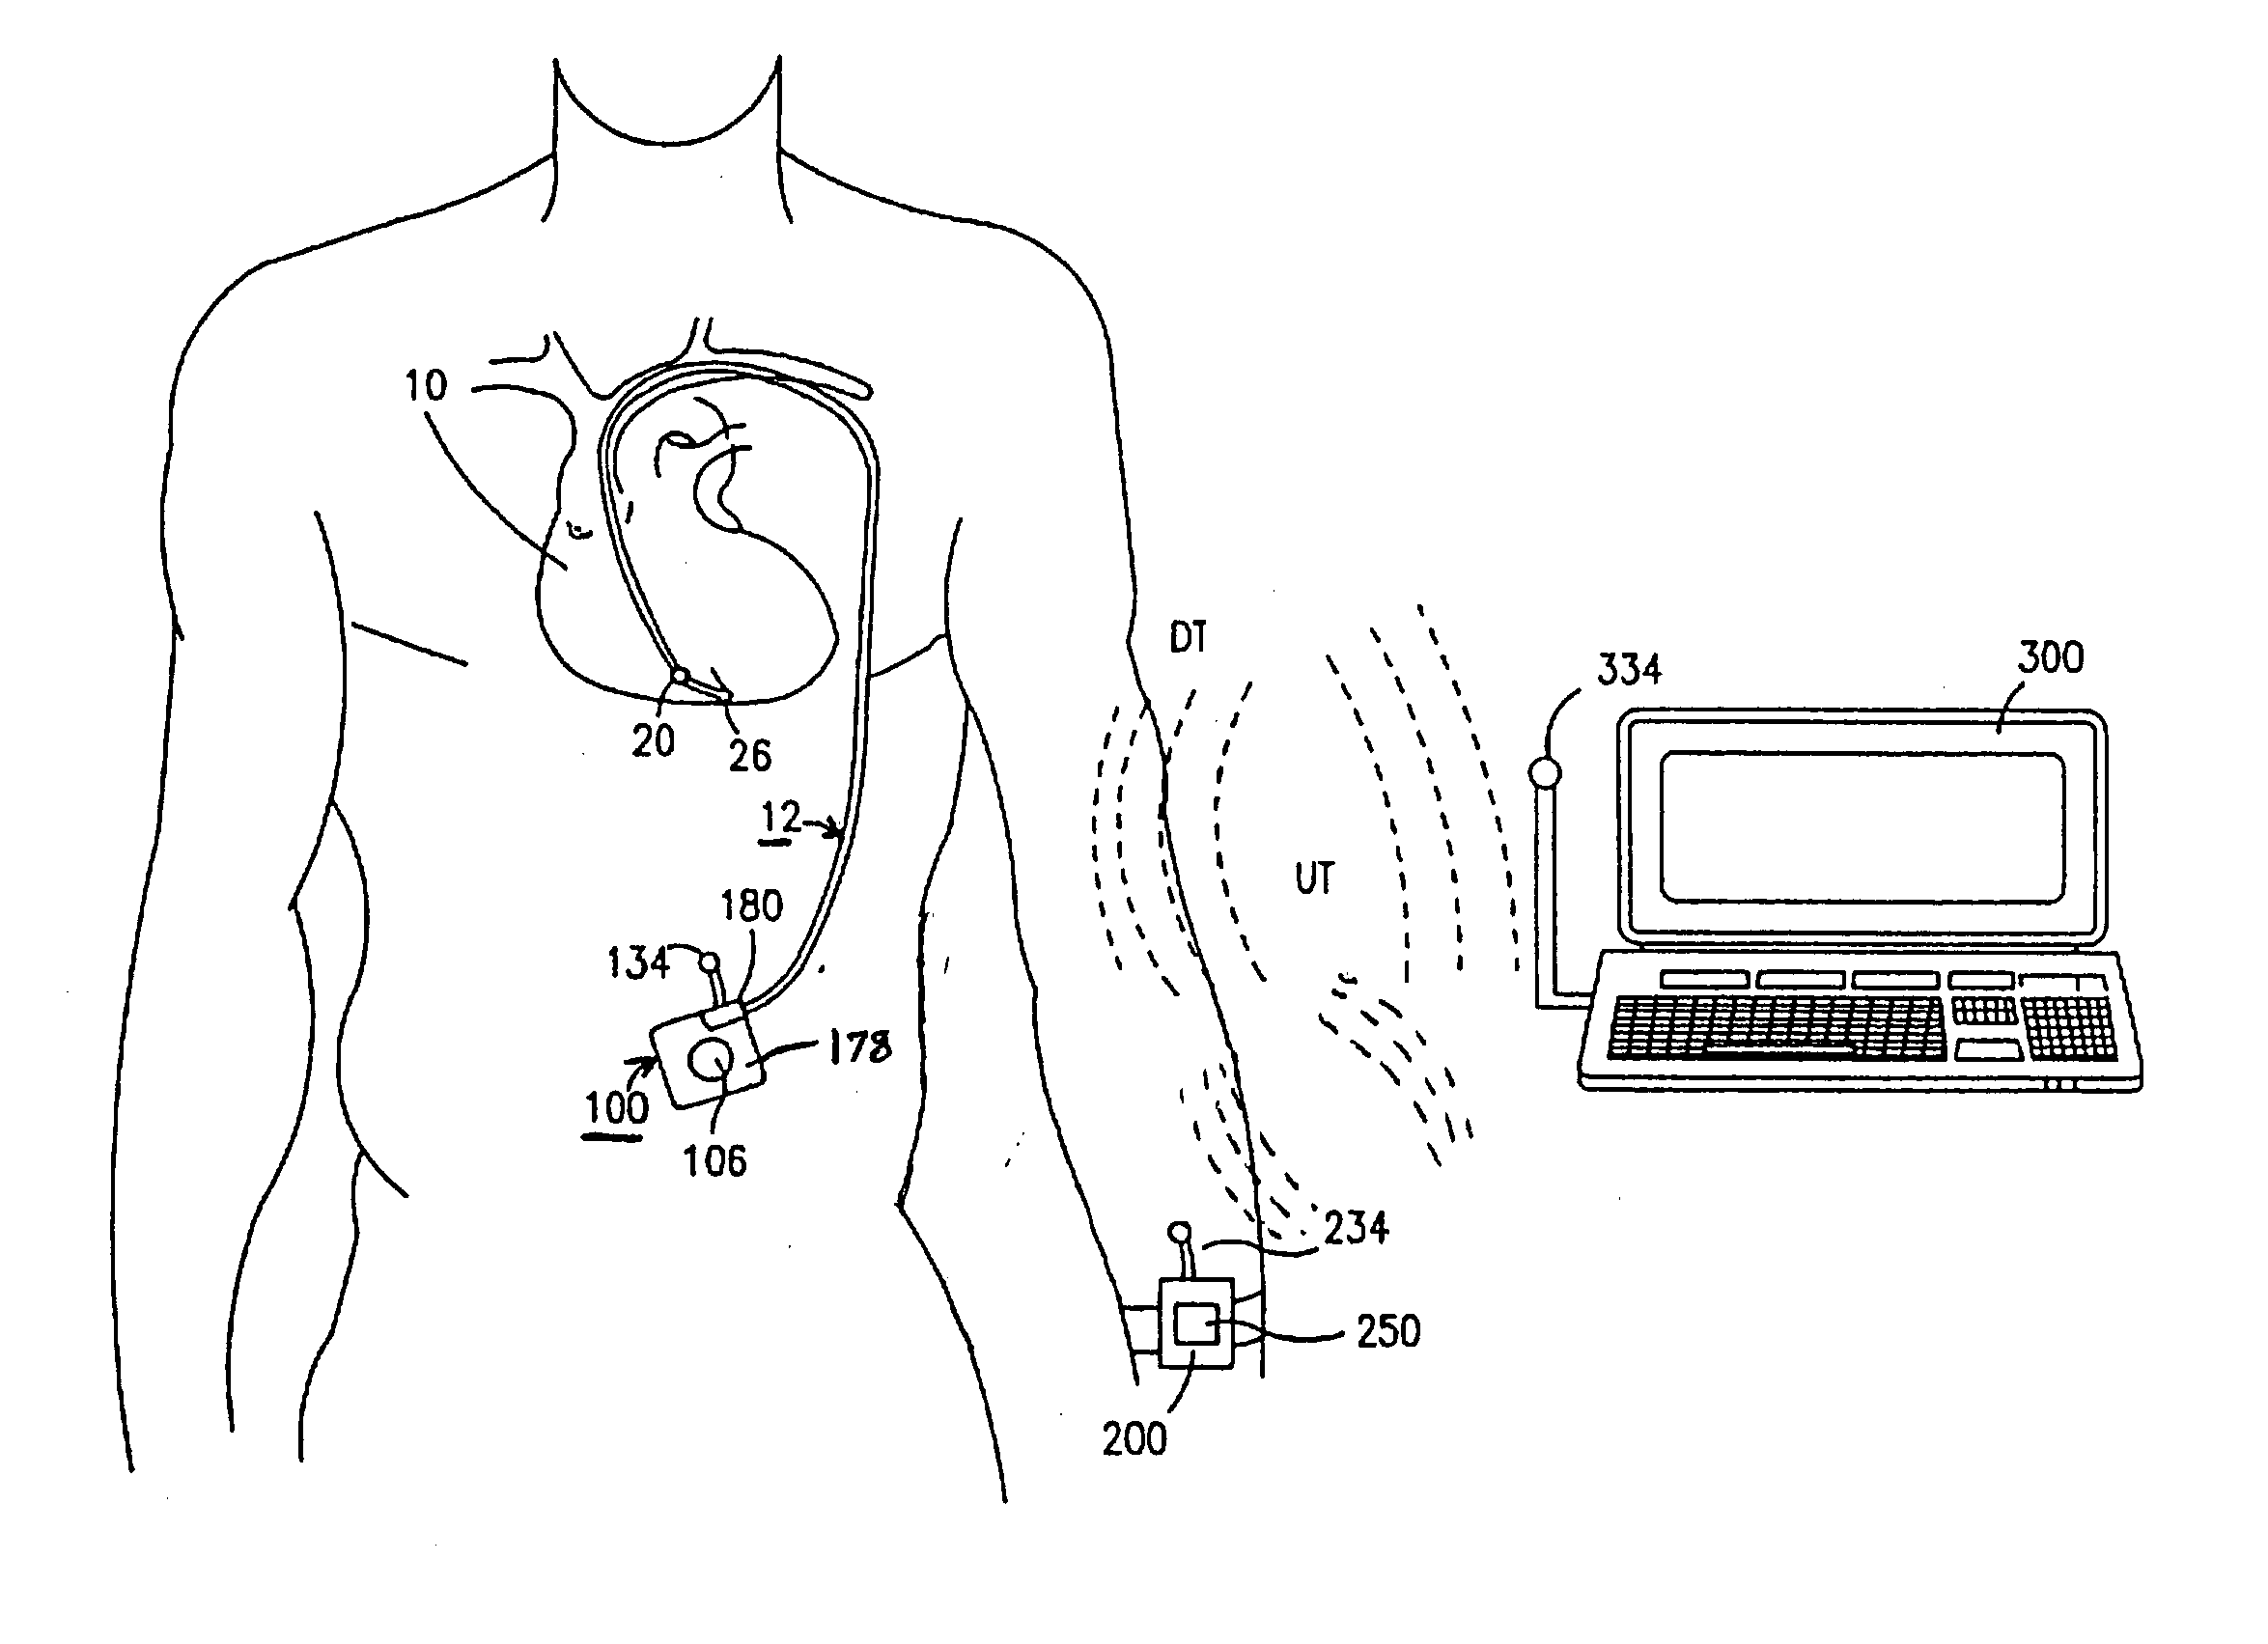 Methods and apparatus for estimation of ventricular afterload based on ventricular pressure measurements